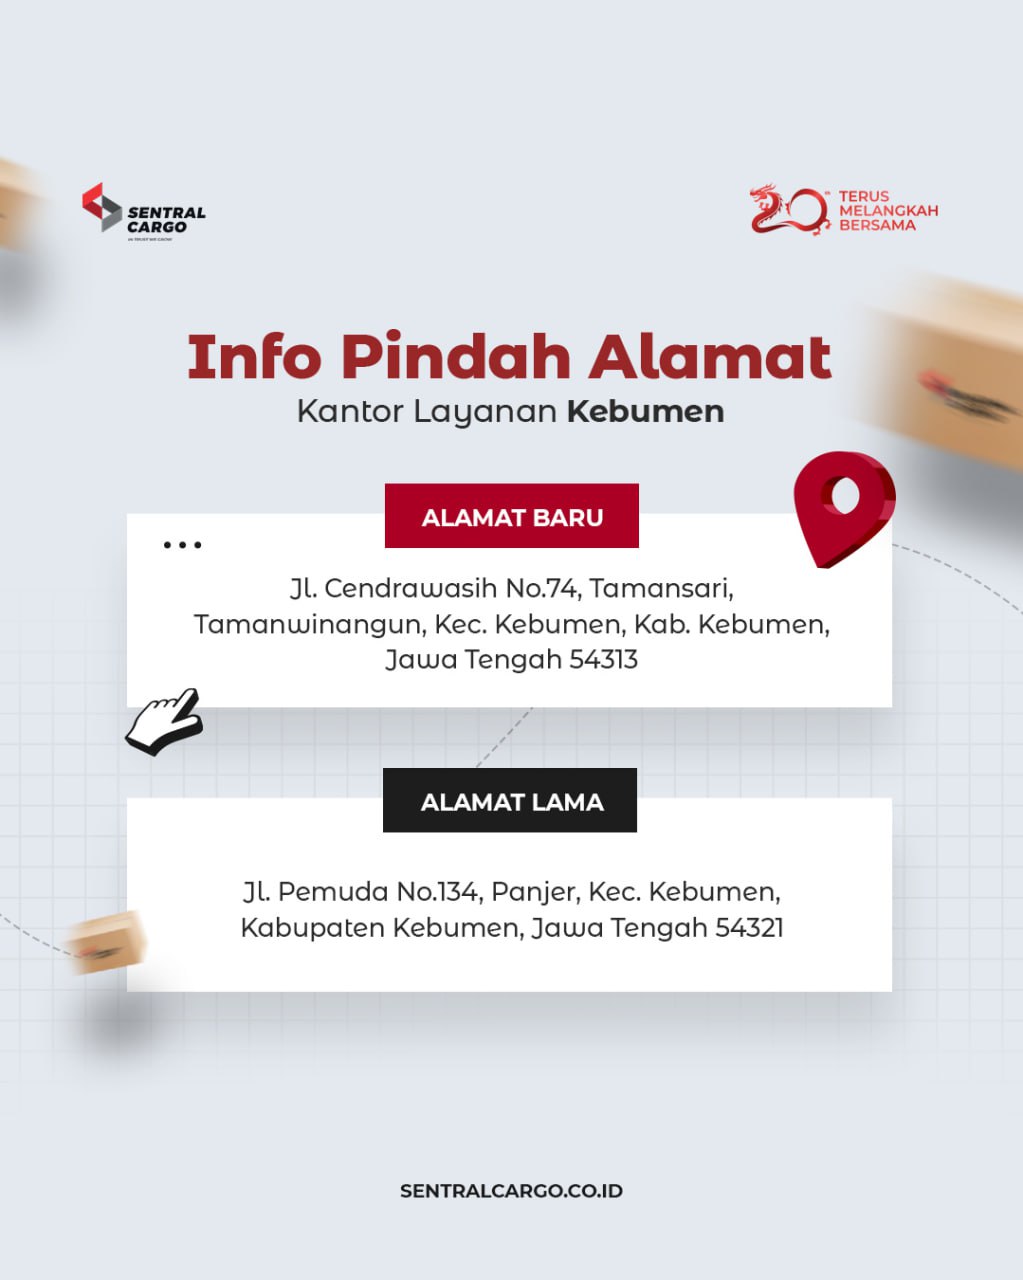 [ANNOUNCEMENT] Relocation of Sentral Cargo Kebumen Drop Point Address